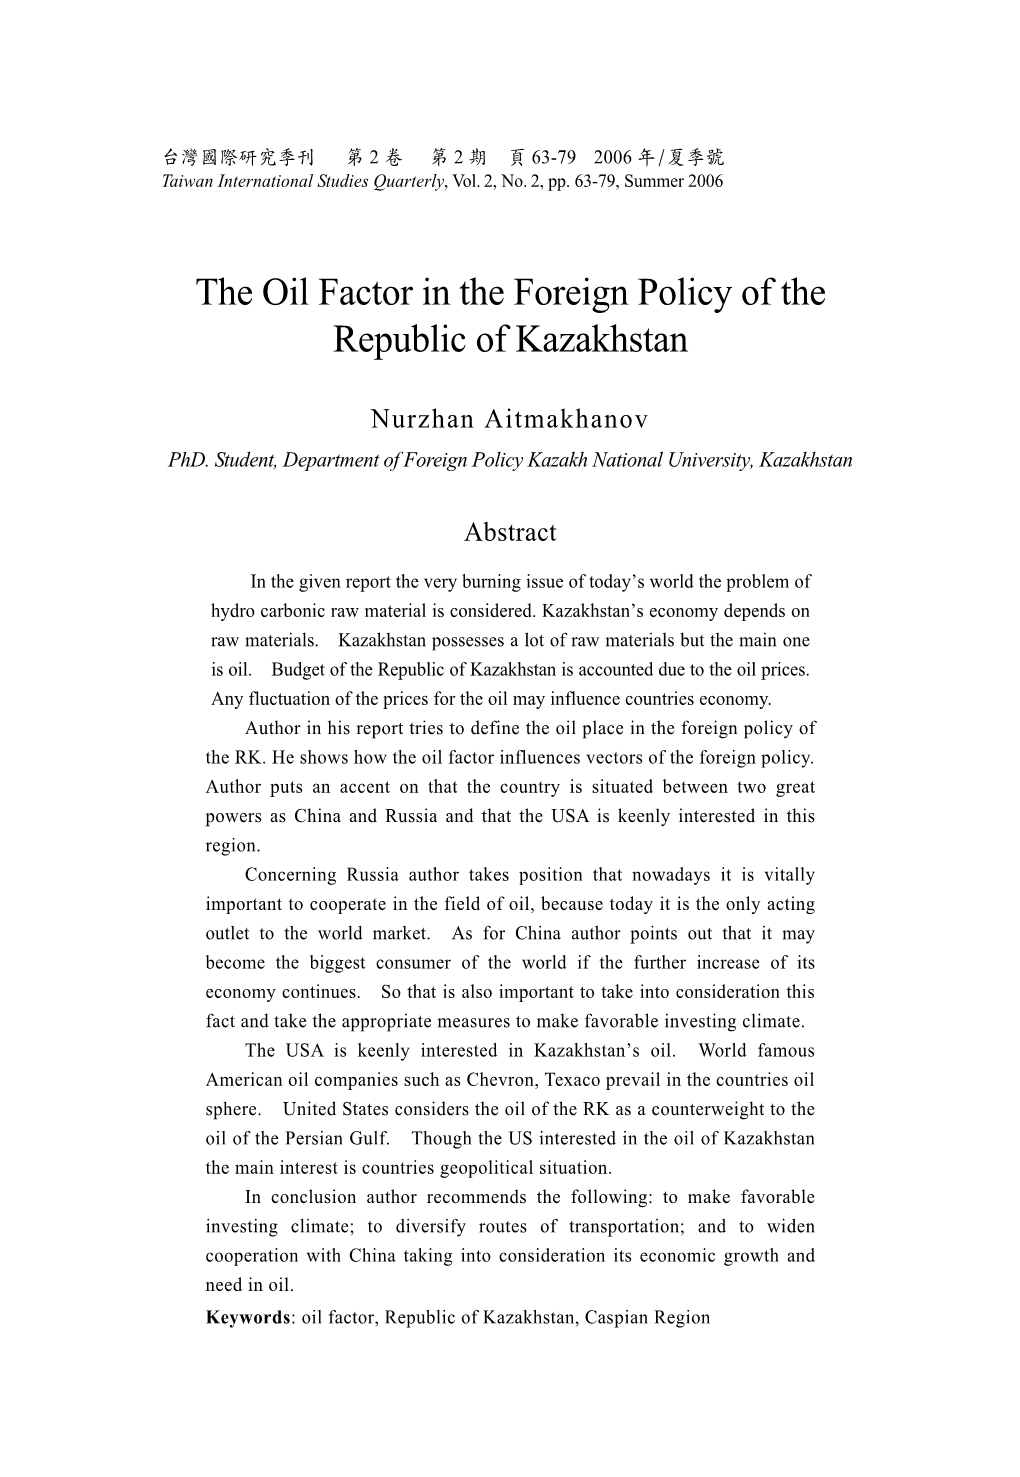 The Oil Factor in the Foreign Policy of the Republic of Kazakhstan